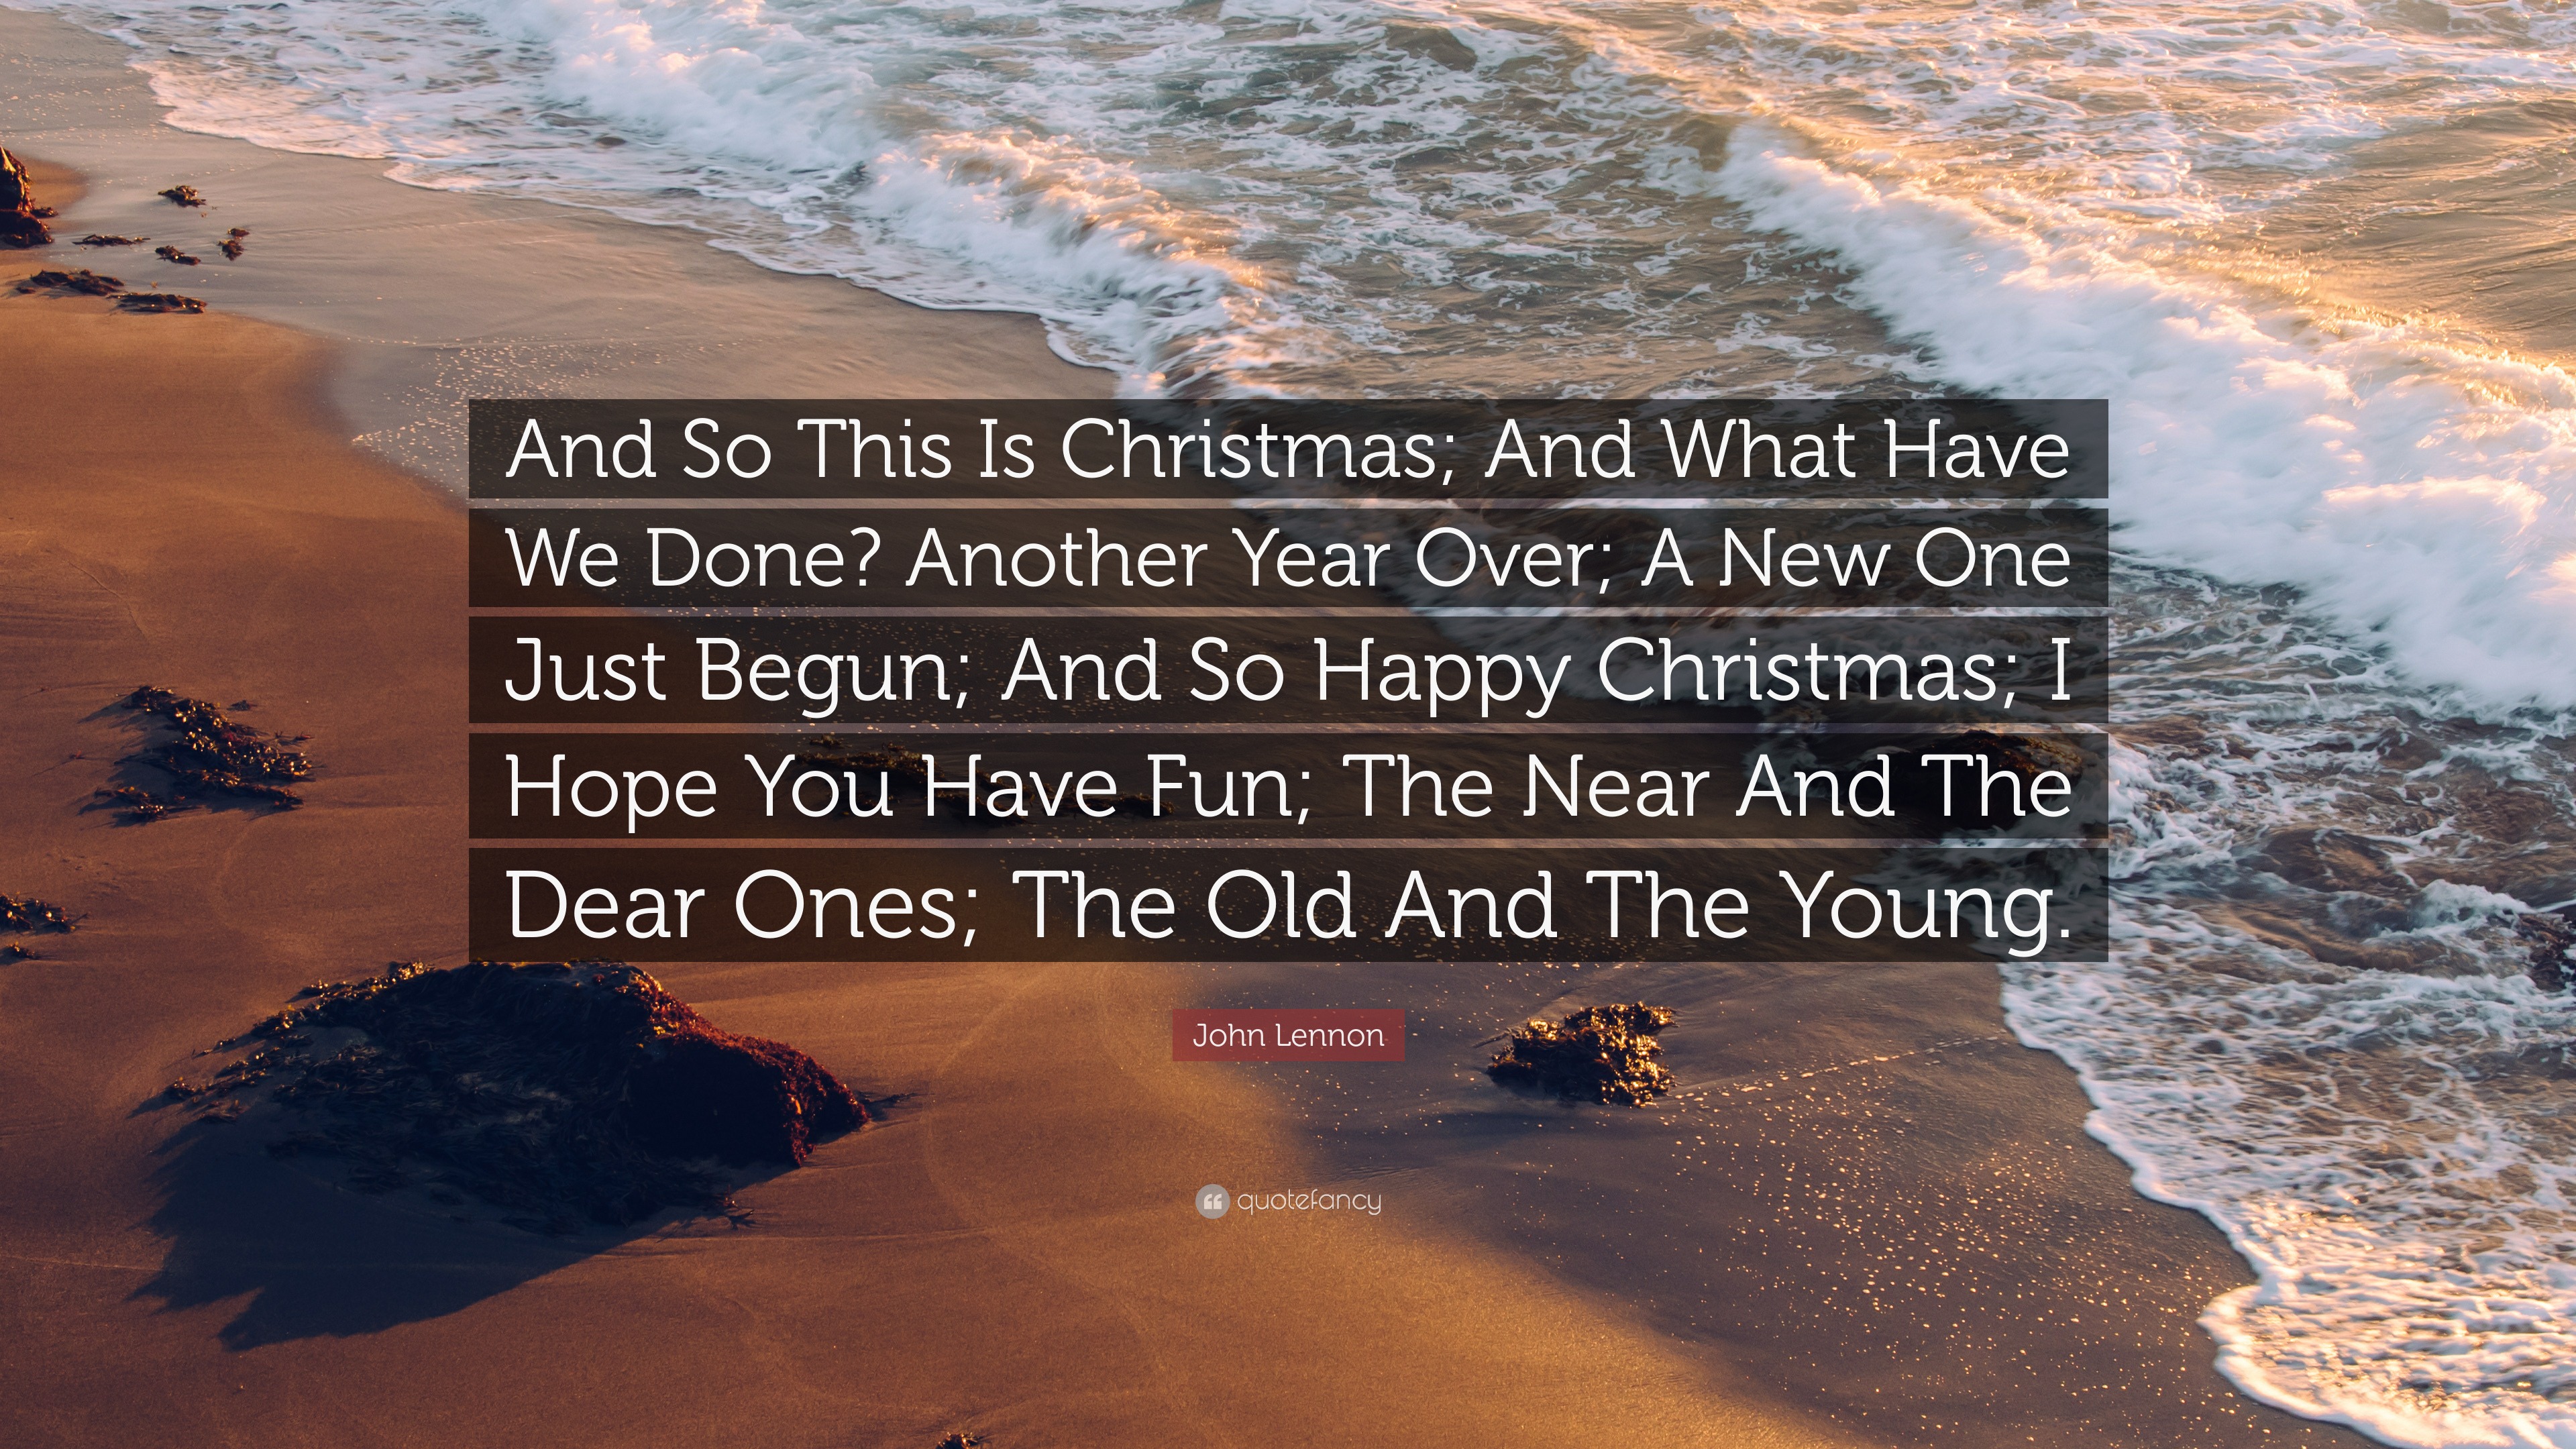 John Lennon Quote: "And So This Is Christmas; And What Have We Done ...